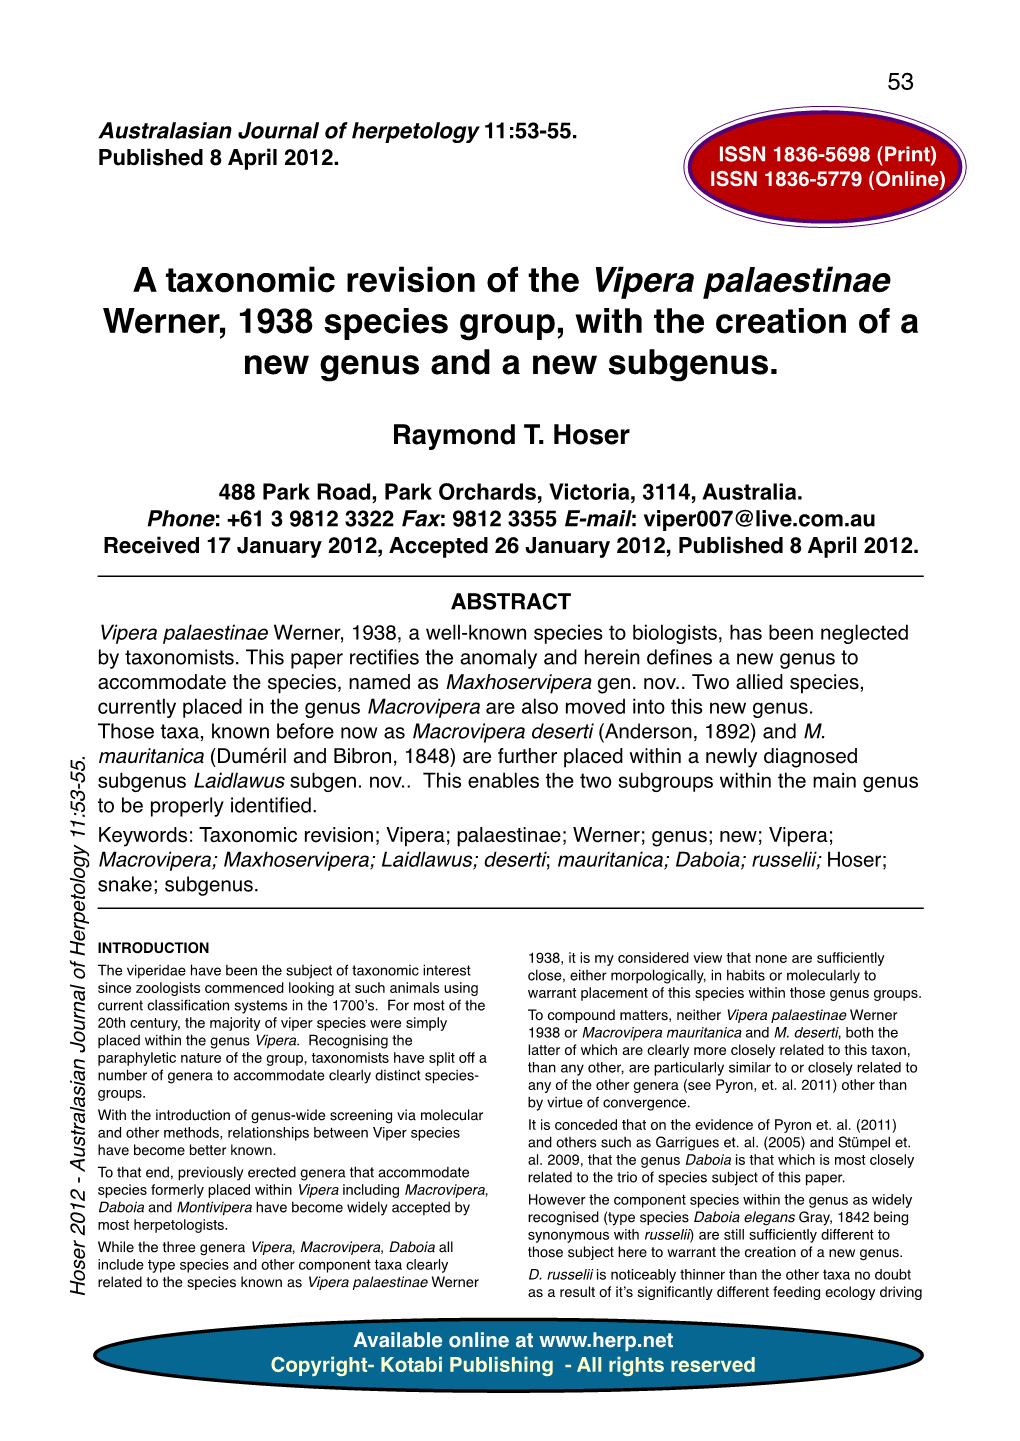 A Taxonomic Revision of the Vipera Palaestinae Werner, 1938 Species Group, with the Creation of a New Genus and a New Subgenus